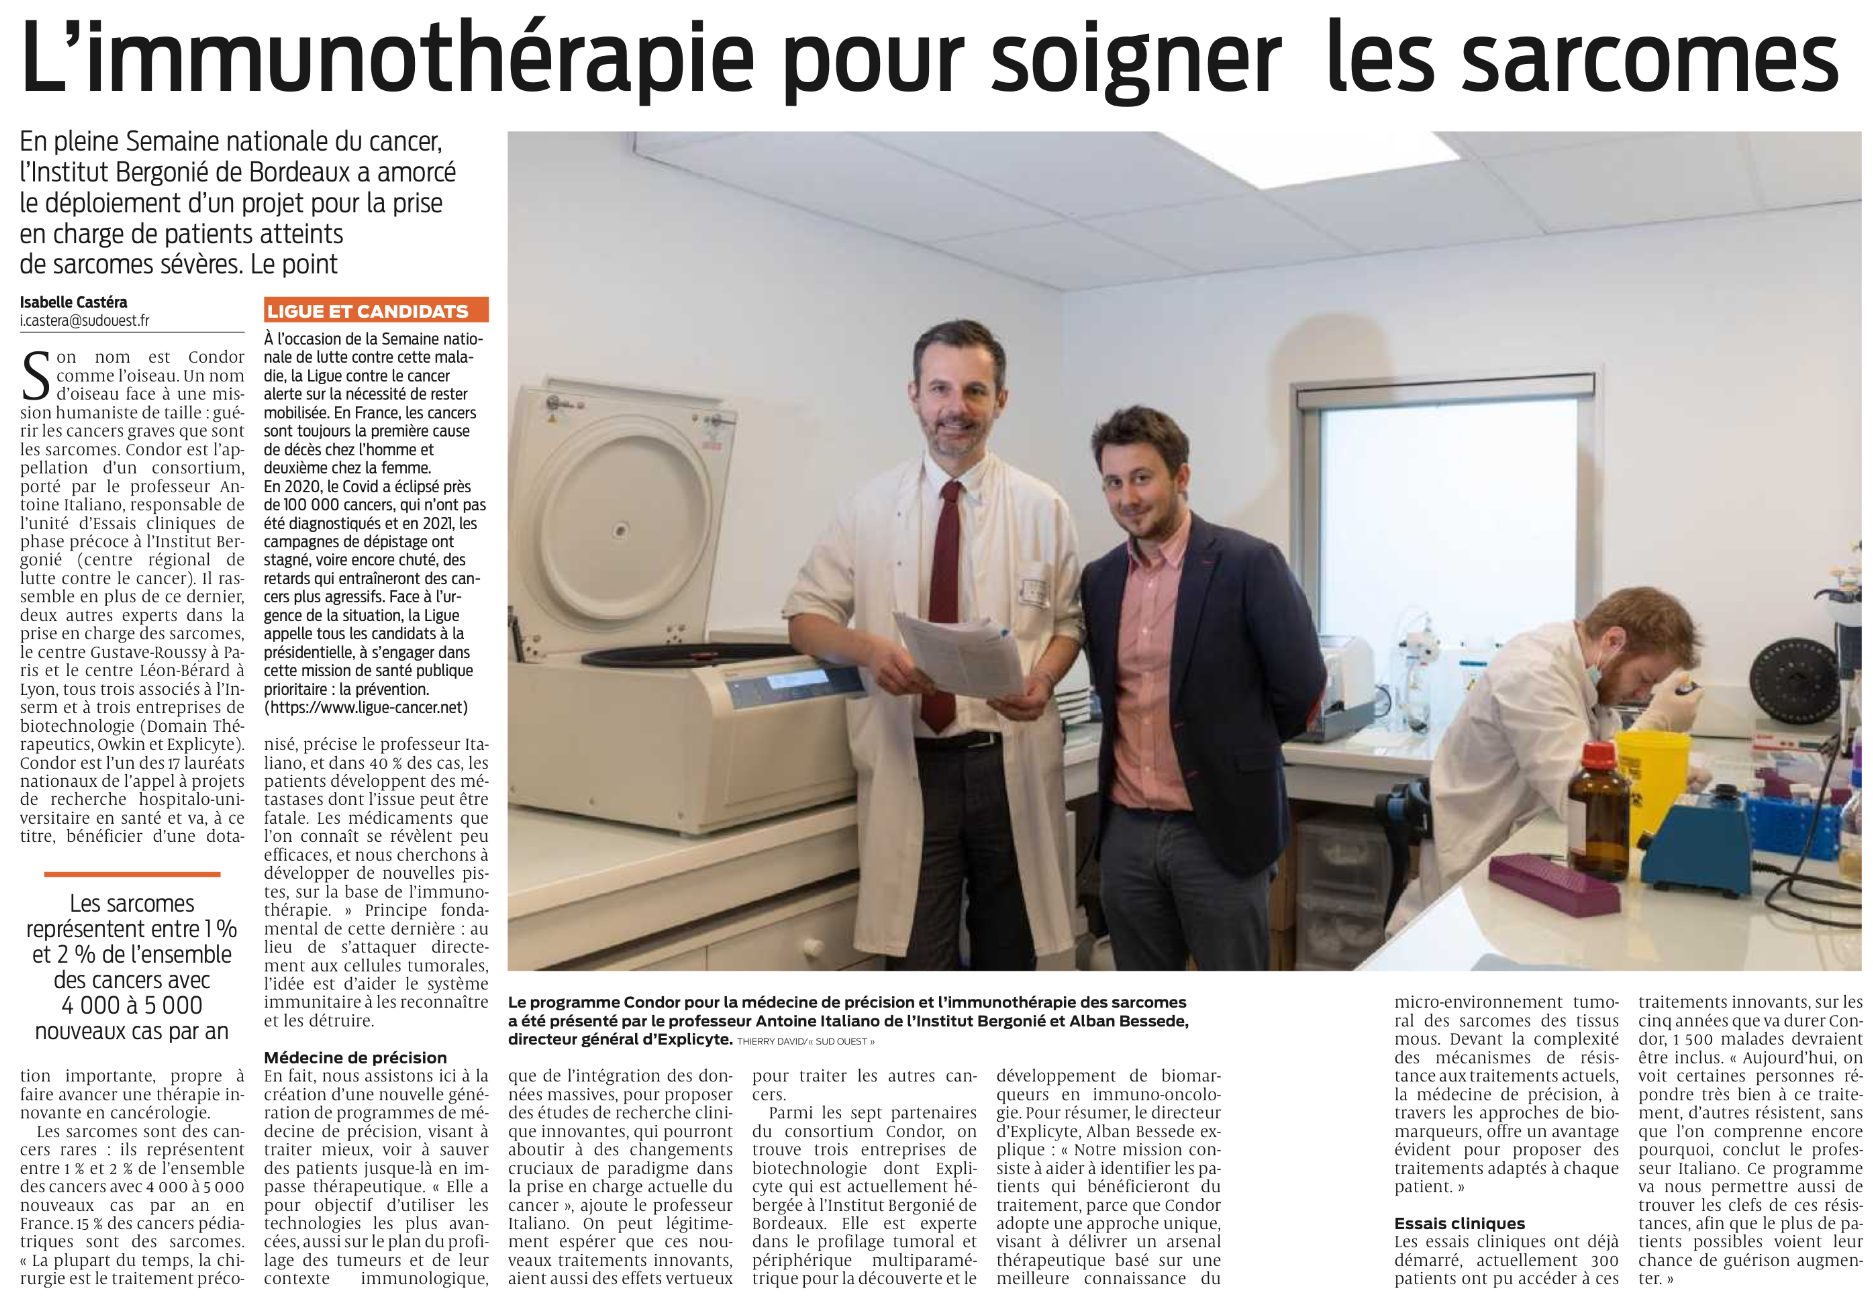 CONDOR project wants to revolutionize by 2027 the therapeutic management of soft tissue sarcomas patients with 1 coordinator + 7 strategic partners...